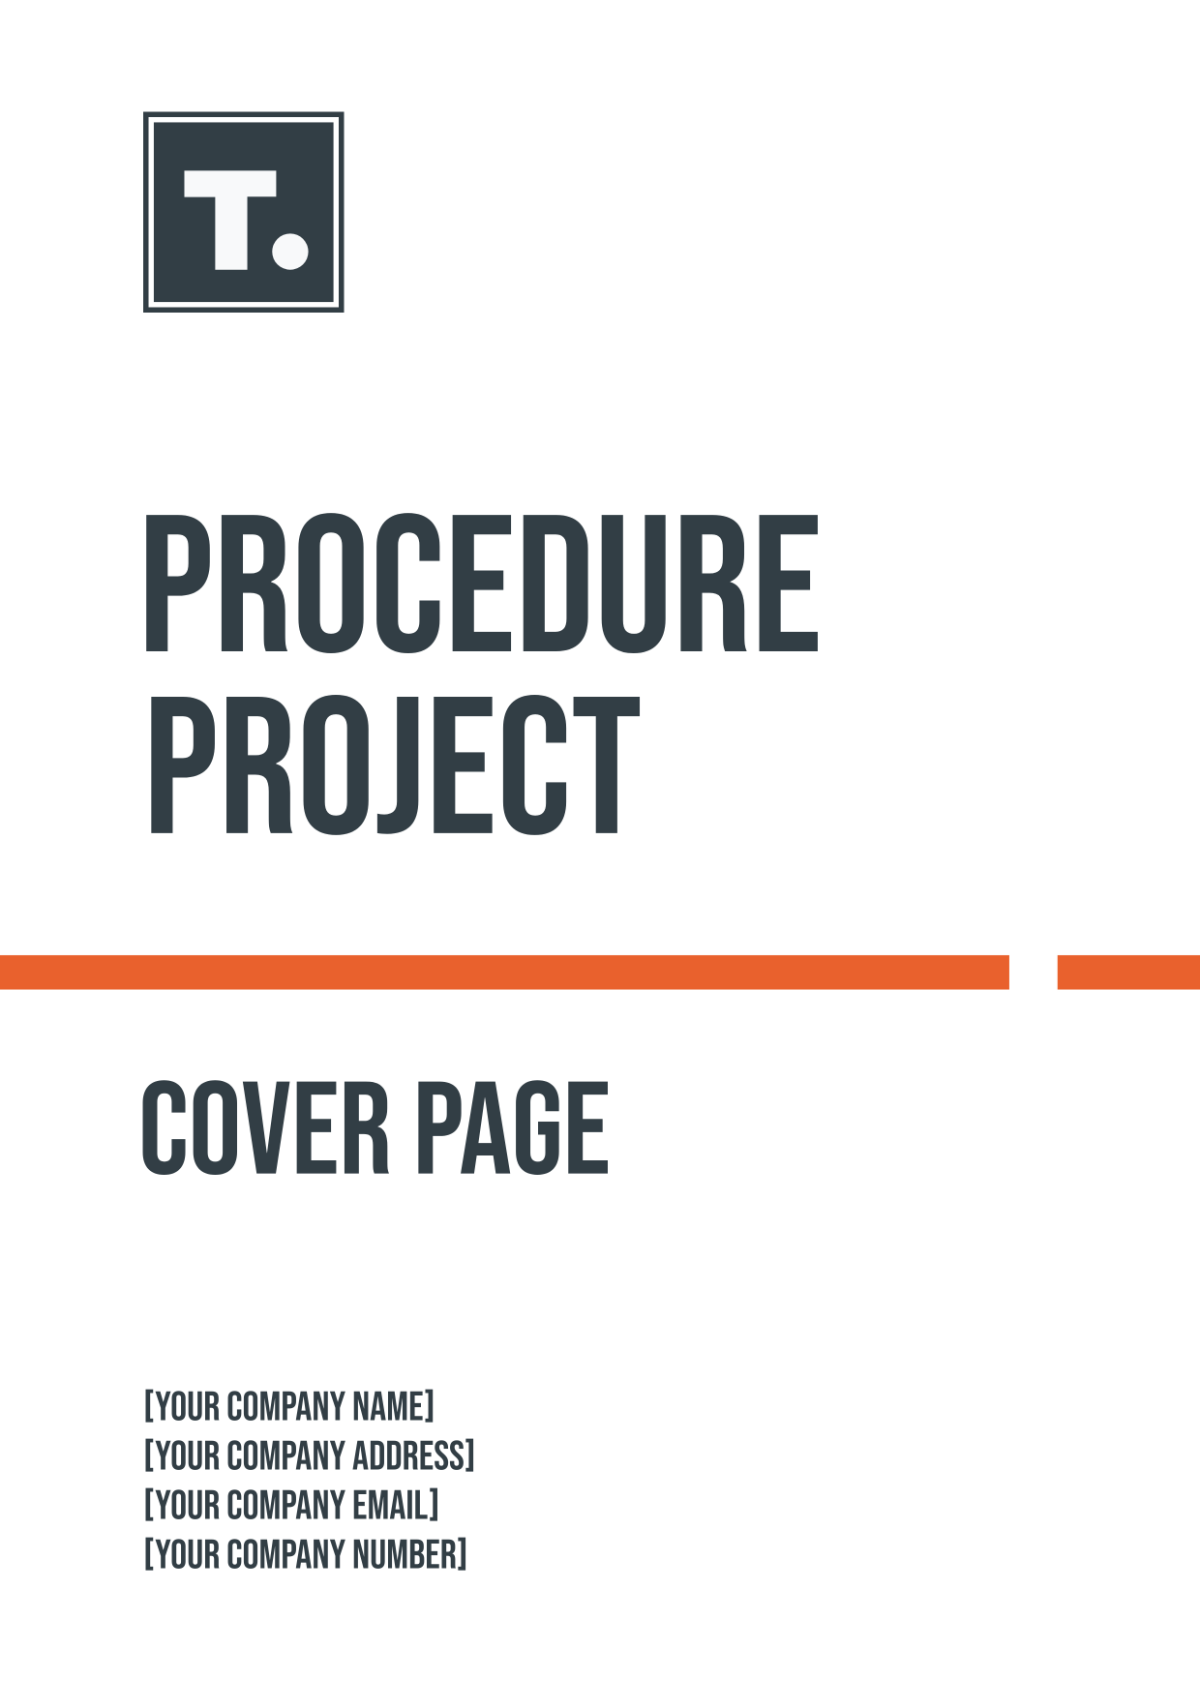 Procedure Project Cover Page